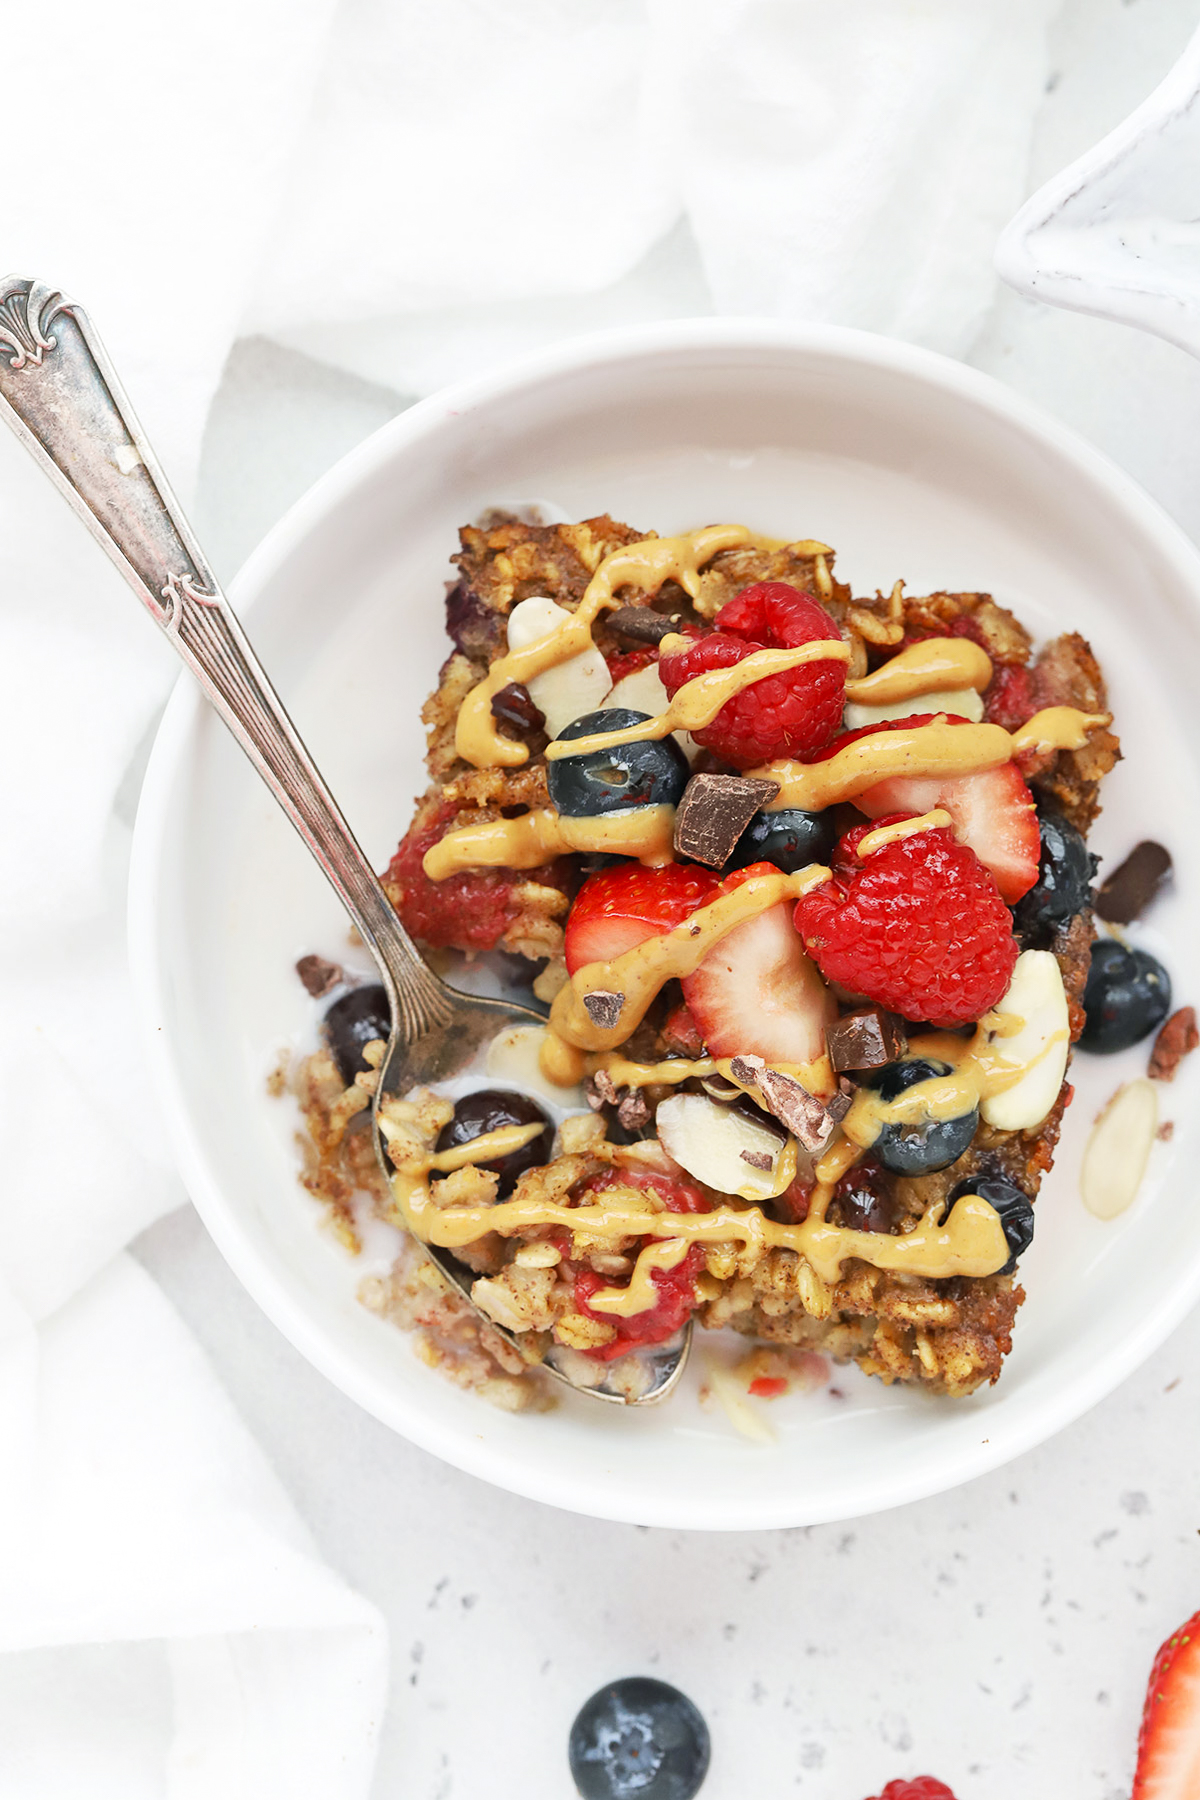 Overhead view of a slice of mixed berry baked oatmeal topped with peanut butter, sliced almonds, fresh berries, and cacao nibs